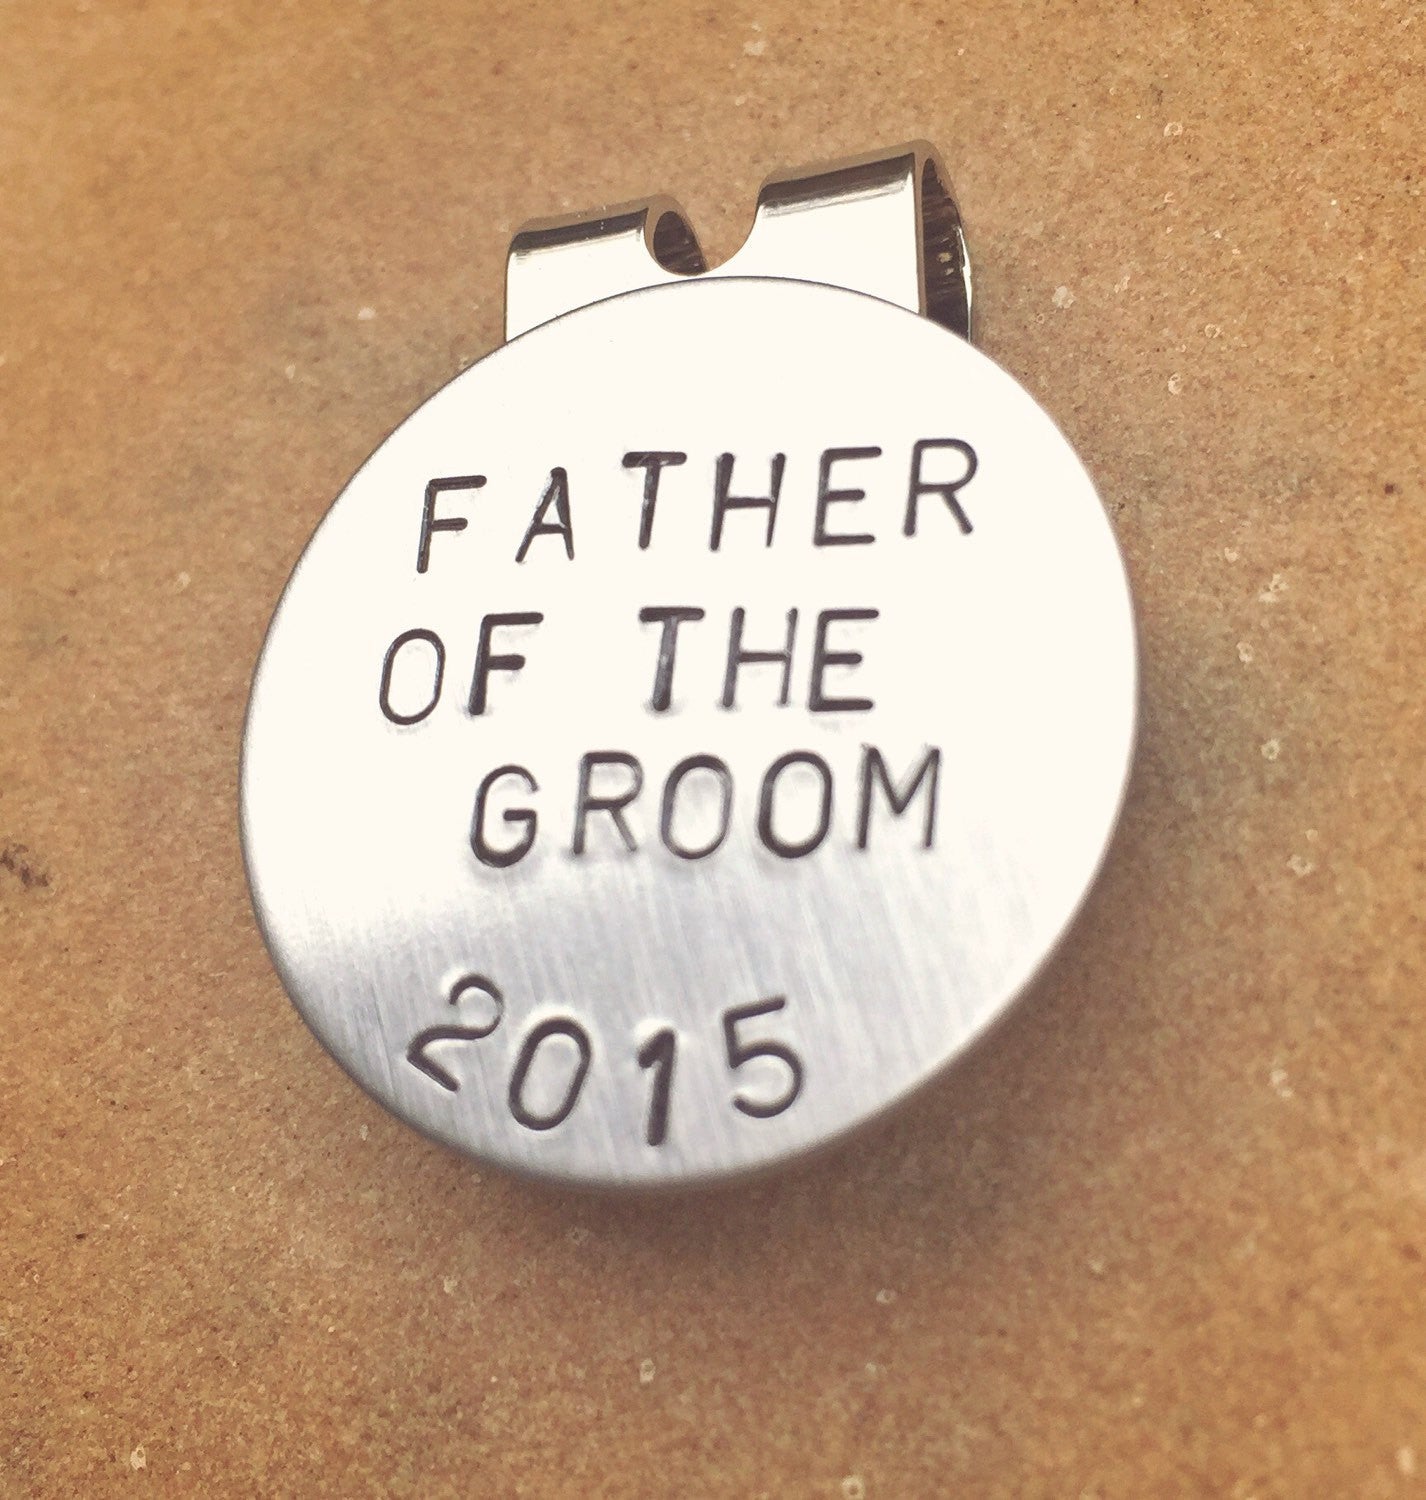 Christmas Gifts for Men, Golf Marker, Father Of The Groom, Boyfriend Gift, Father Of The Bride, Mens Gifts,Golf Gifts - Natashaaloha, jewelry, bracelets, necklace, keychains, fishing lures, gifts for men, charms, personalized, 